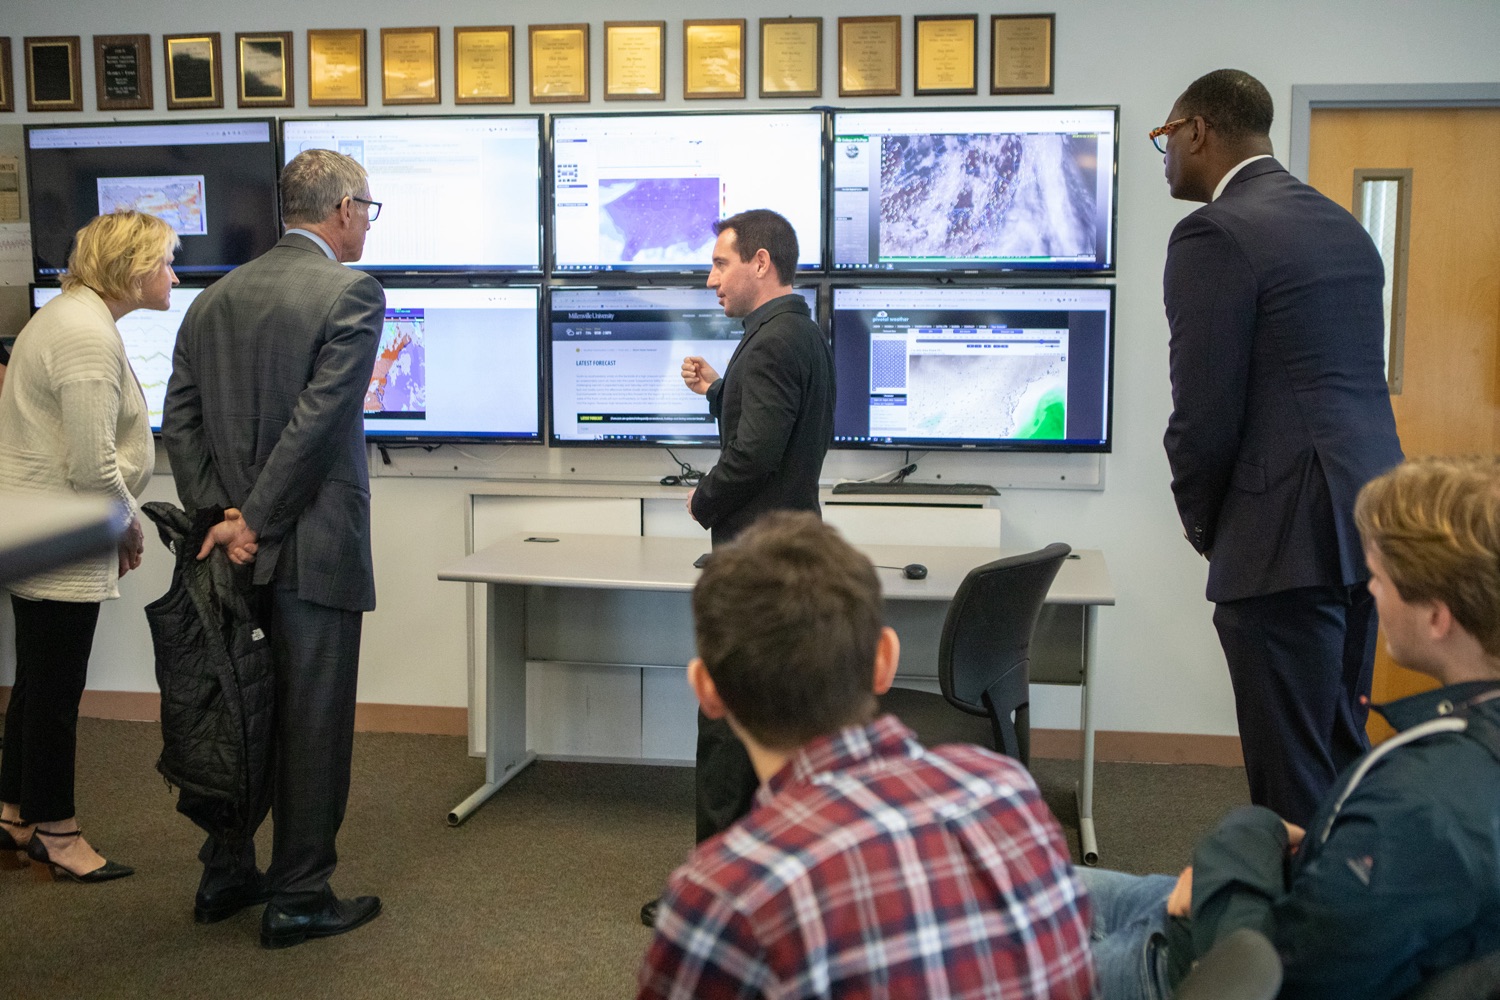 PDE Secretary Dr. Khalid N. Mumin takes a tour of the Weather Information Center. Millersville Meteorology is a nationally recognized flagship program of the university, with an innovative curriculum in space weather, air quality, water resources, data analytics, and emergency response and disaster preparedness. In 2020, Millersville became the seventh university in Pennsylvania to be designated as a StormReady University...Pennsylvania Department of Education (PDE) Secretary Dr. Khalid N. Mumin and Deputy Secretary Dr. Kate Shaw joined Pennsylvania State System of Higher Education (PASSHE) Chancellor Dan Greenstein at Millersville University to highlight Governor Shapiros proposed investments in higher education and how Pennsylvanias public postsecondary system is preparing students to be workforce-ready upon graduation.. .Governor Shapiros blueprint for higher education will help Pennsylvanias public universities build on areas of strength and address the challenges caused by a 30-year disinvestment in higher education by the Commonwealth, such as competition between universities that results in higher costs and lower enrollment. Governor Shapiros blueprint will ensure better coordination across PASSHE universities and community colleges to expand access to affordable, workforce-ready credentials and degrees across Pennsylvania  including in areas that currently lack access.. .Our Commonwealths institutions of higher education, like Millersville University, do an incredible job preparing students for the future and connecting them with future opportunities, said Secretary Khalid N. Mumin. Governor Josh Shapiros new blueprint for higher education will end the era of disinvestment in our higher education sector, make postsecondary education more accessible and affordable to more Pennsylvanians, and allow these schools to continue to do what they do besteducate learners..<br><a href="https://filesource.amperwave.net/commonwealthofpa/photo/24436_PDE_Blueprint_ERD_003.jpg" target="_blank">⇣ Download Photo</a>